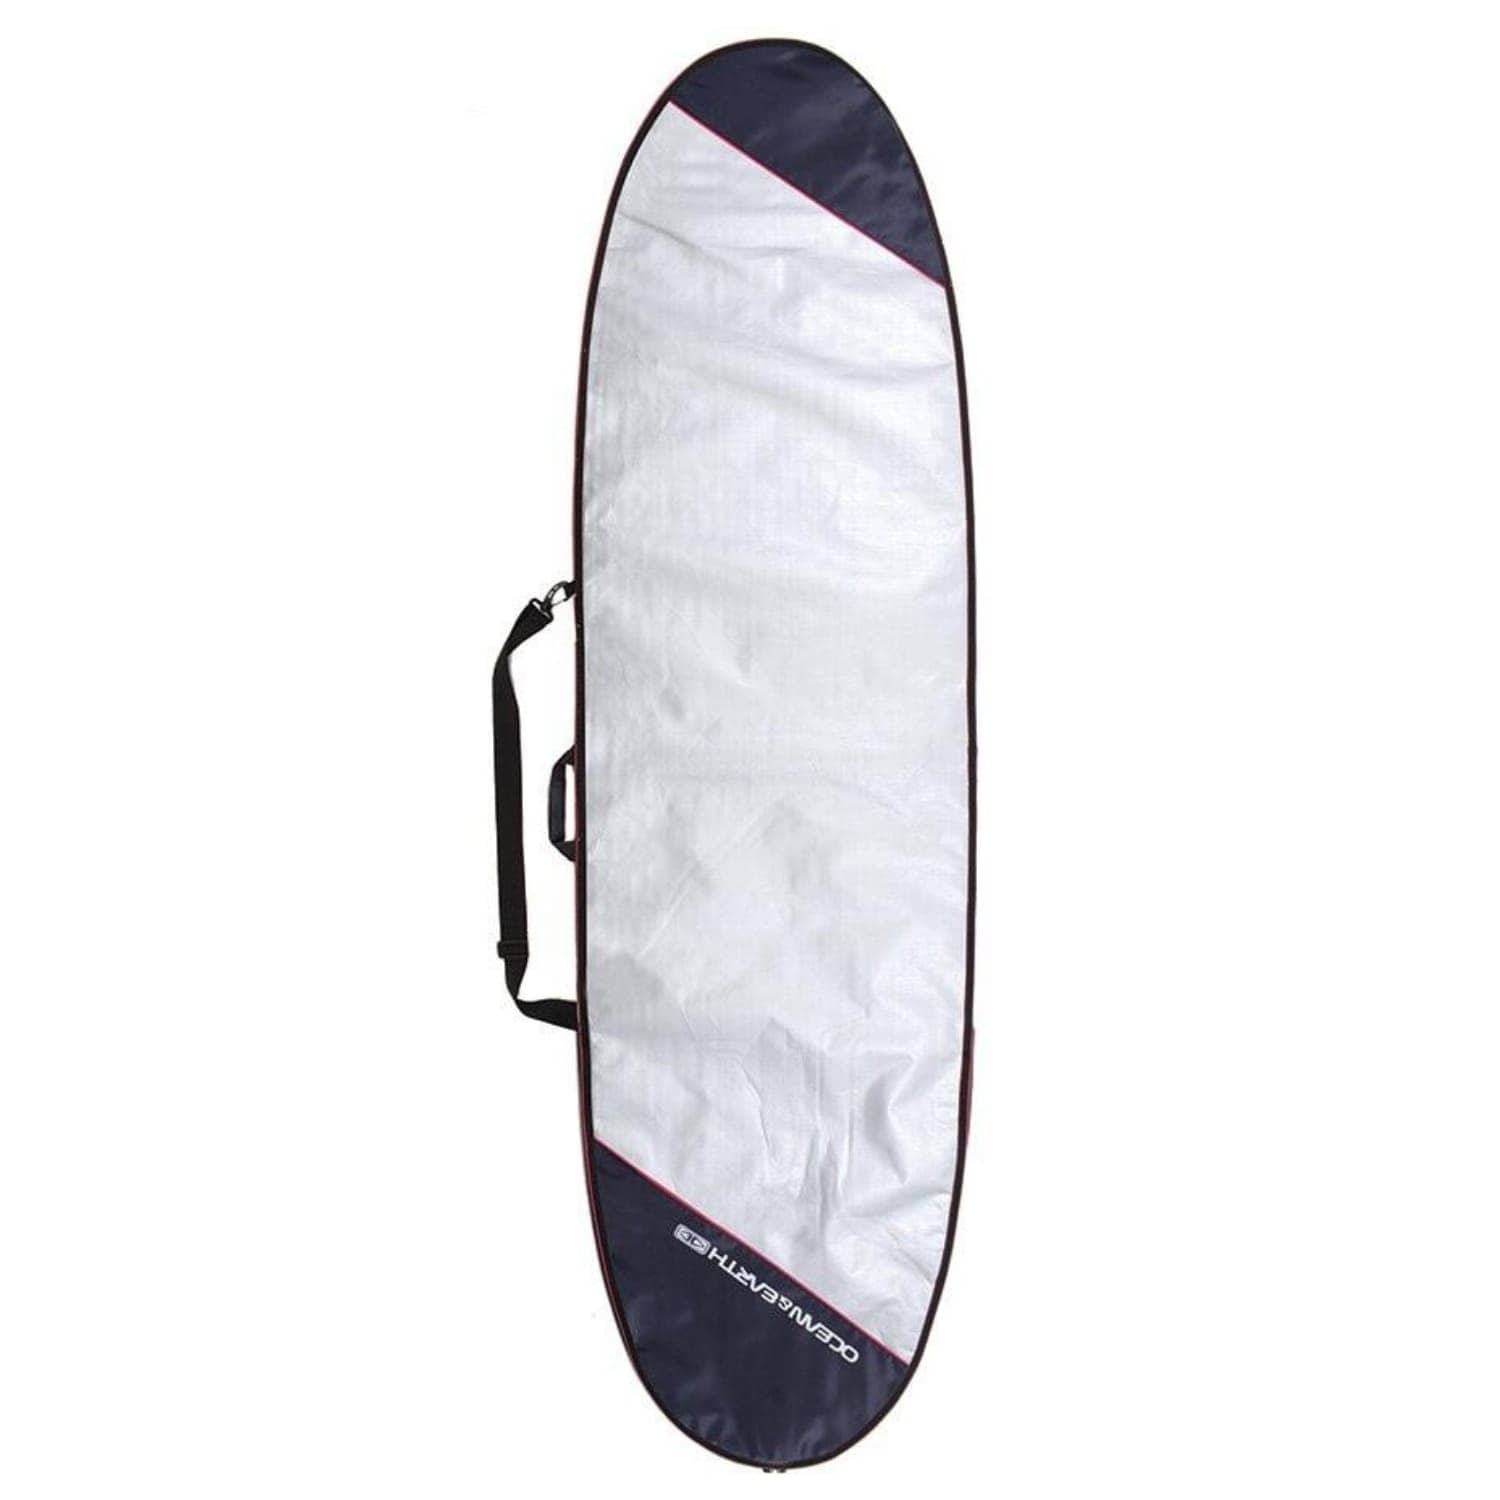 Ocean and Earth Barry Basic Longboard Cover Bag 2020 Silver / Red 10ft 0in - Longboard Surfboard Bag/Cover by Ocean and Earth